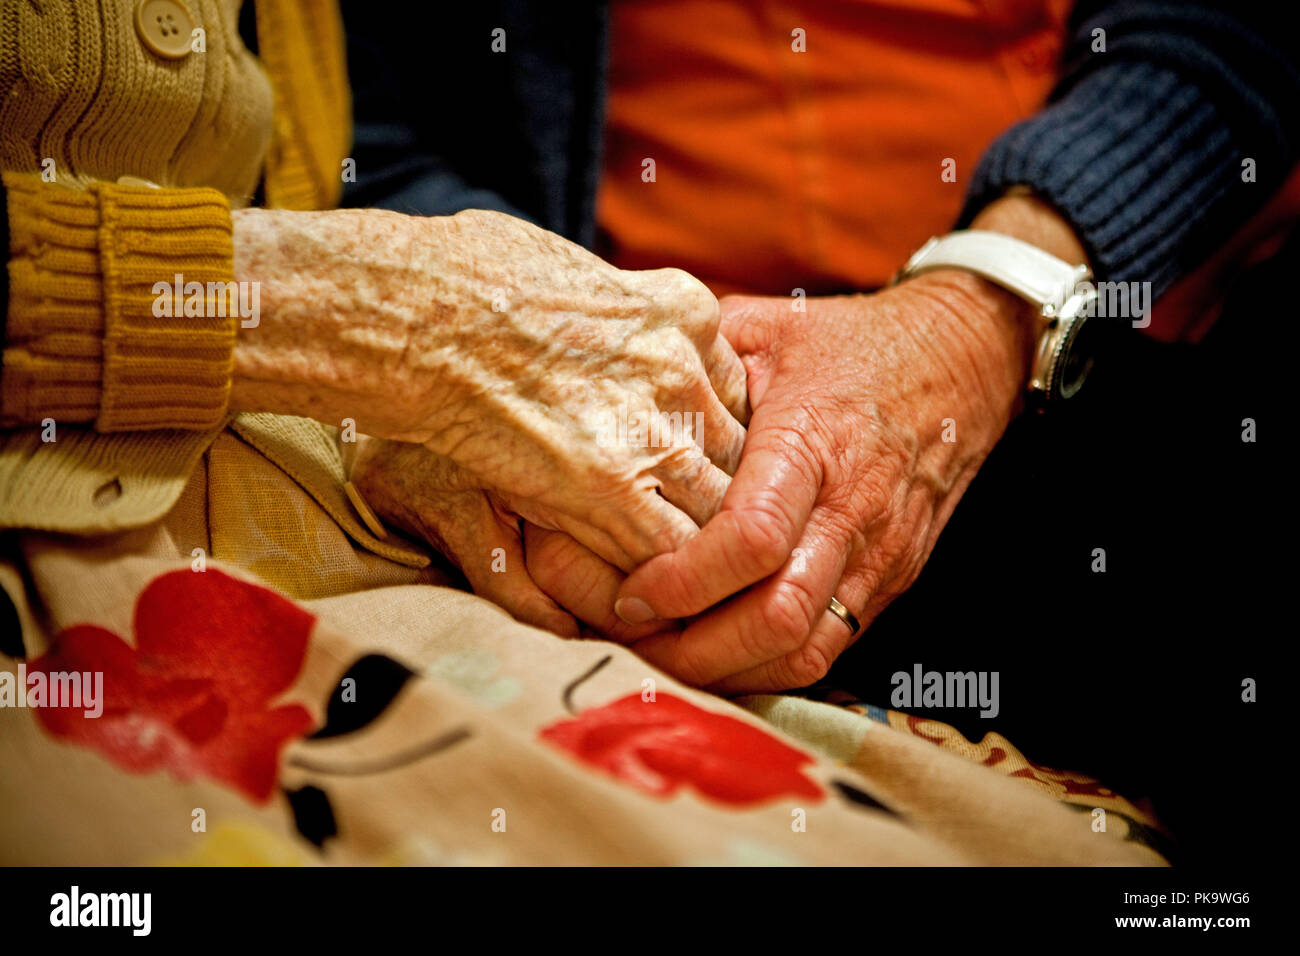 Elderly woman with carer Stock Photo